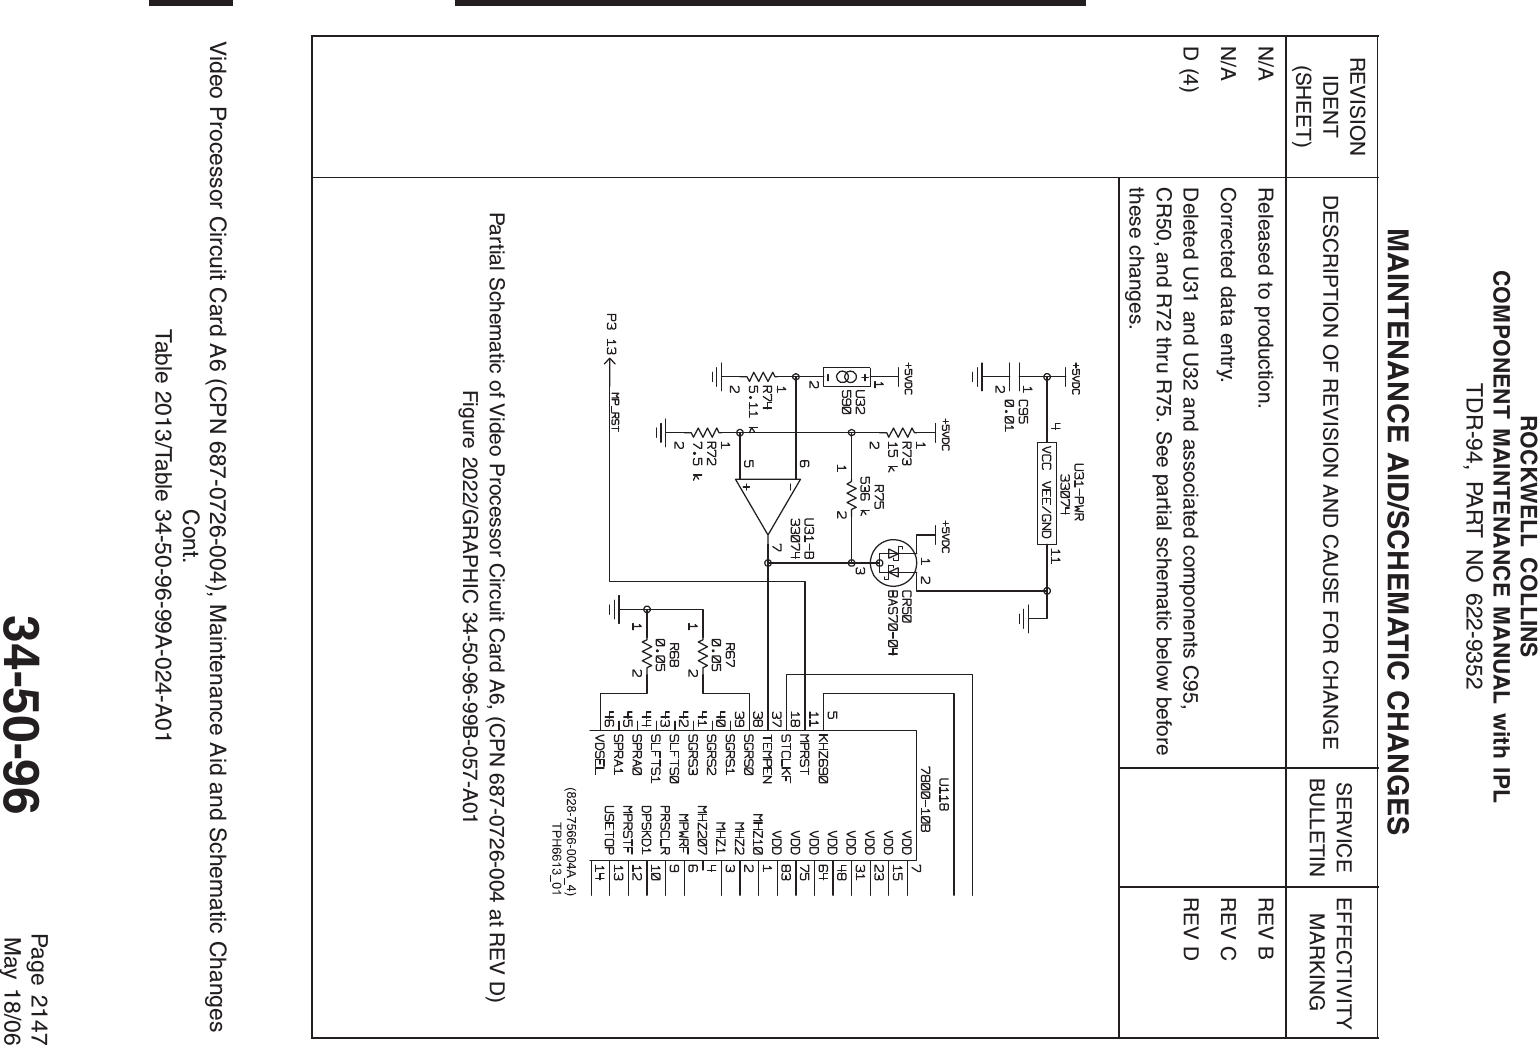 ROCKWELL COLLINSCOMPONENT MAINTENANCE MANUAL with IPLTDR-94, PART NO 622-9352MAINTENANCE AID/SCHEMATIC CHANGESREVISIONIDENT(SHEET)DESCRIPTION OF REVISION AND CAUSE FOR CHANGE SERVICEBULLETINEFFECTIVITYMARKINGN/A Released to production. REV BN/A Corrected data entry. REV CD (4) Deleted U31 and U32 and associated components C95,CR50, and R72 thru R75. See partial schematic below beforethese changes.REV DPartial Schematic of Video Processor Circuit Card A6, (CPN 687-0726-004 at REV D)Figure 2022/GRAPHIC 34-50-96-99B-057-A01Video Processor Circuit Card A6 (CPN 687-0726-004), Maintenance Aid and Schematic ChangesCont.Table 2013/Table 34-50-96-99A-024-A0134-50-96 Page 2147May 18/06